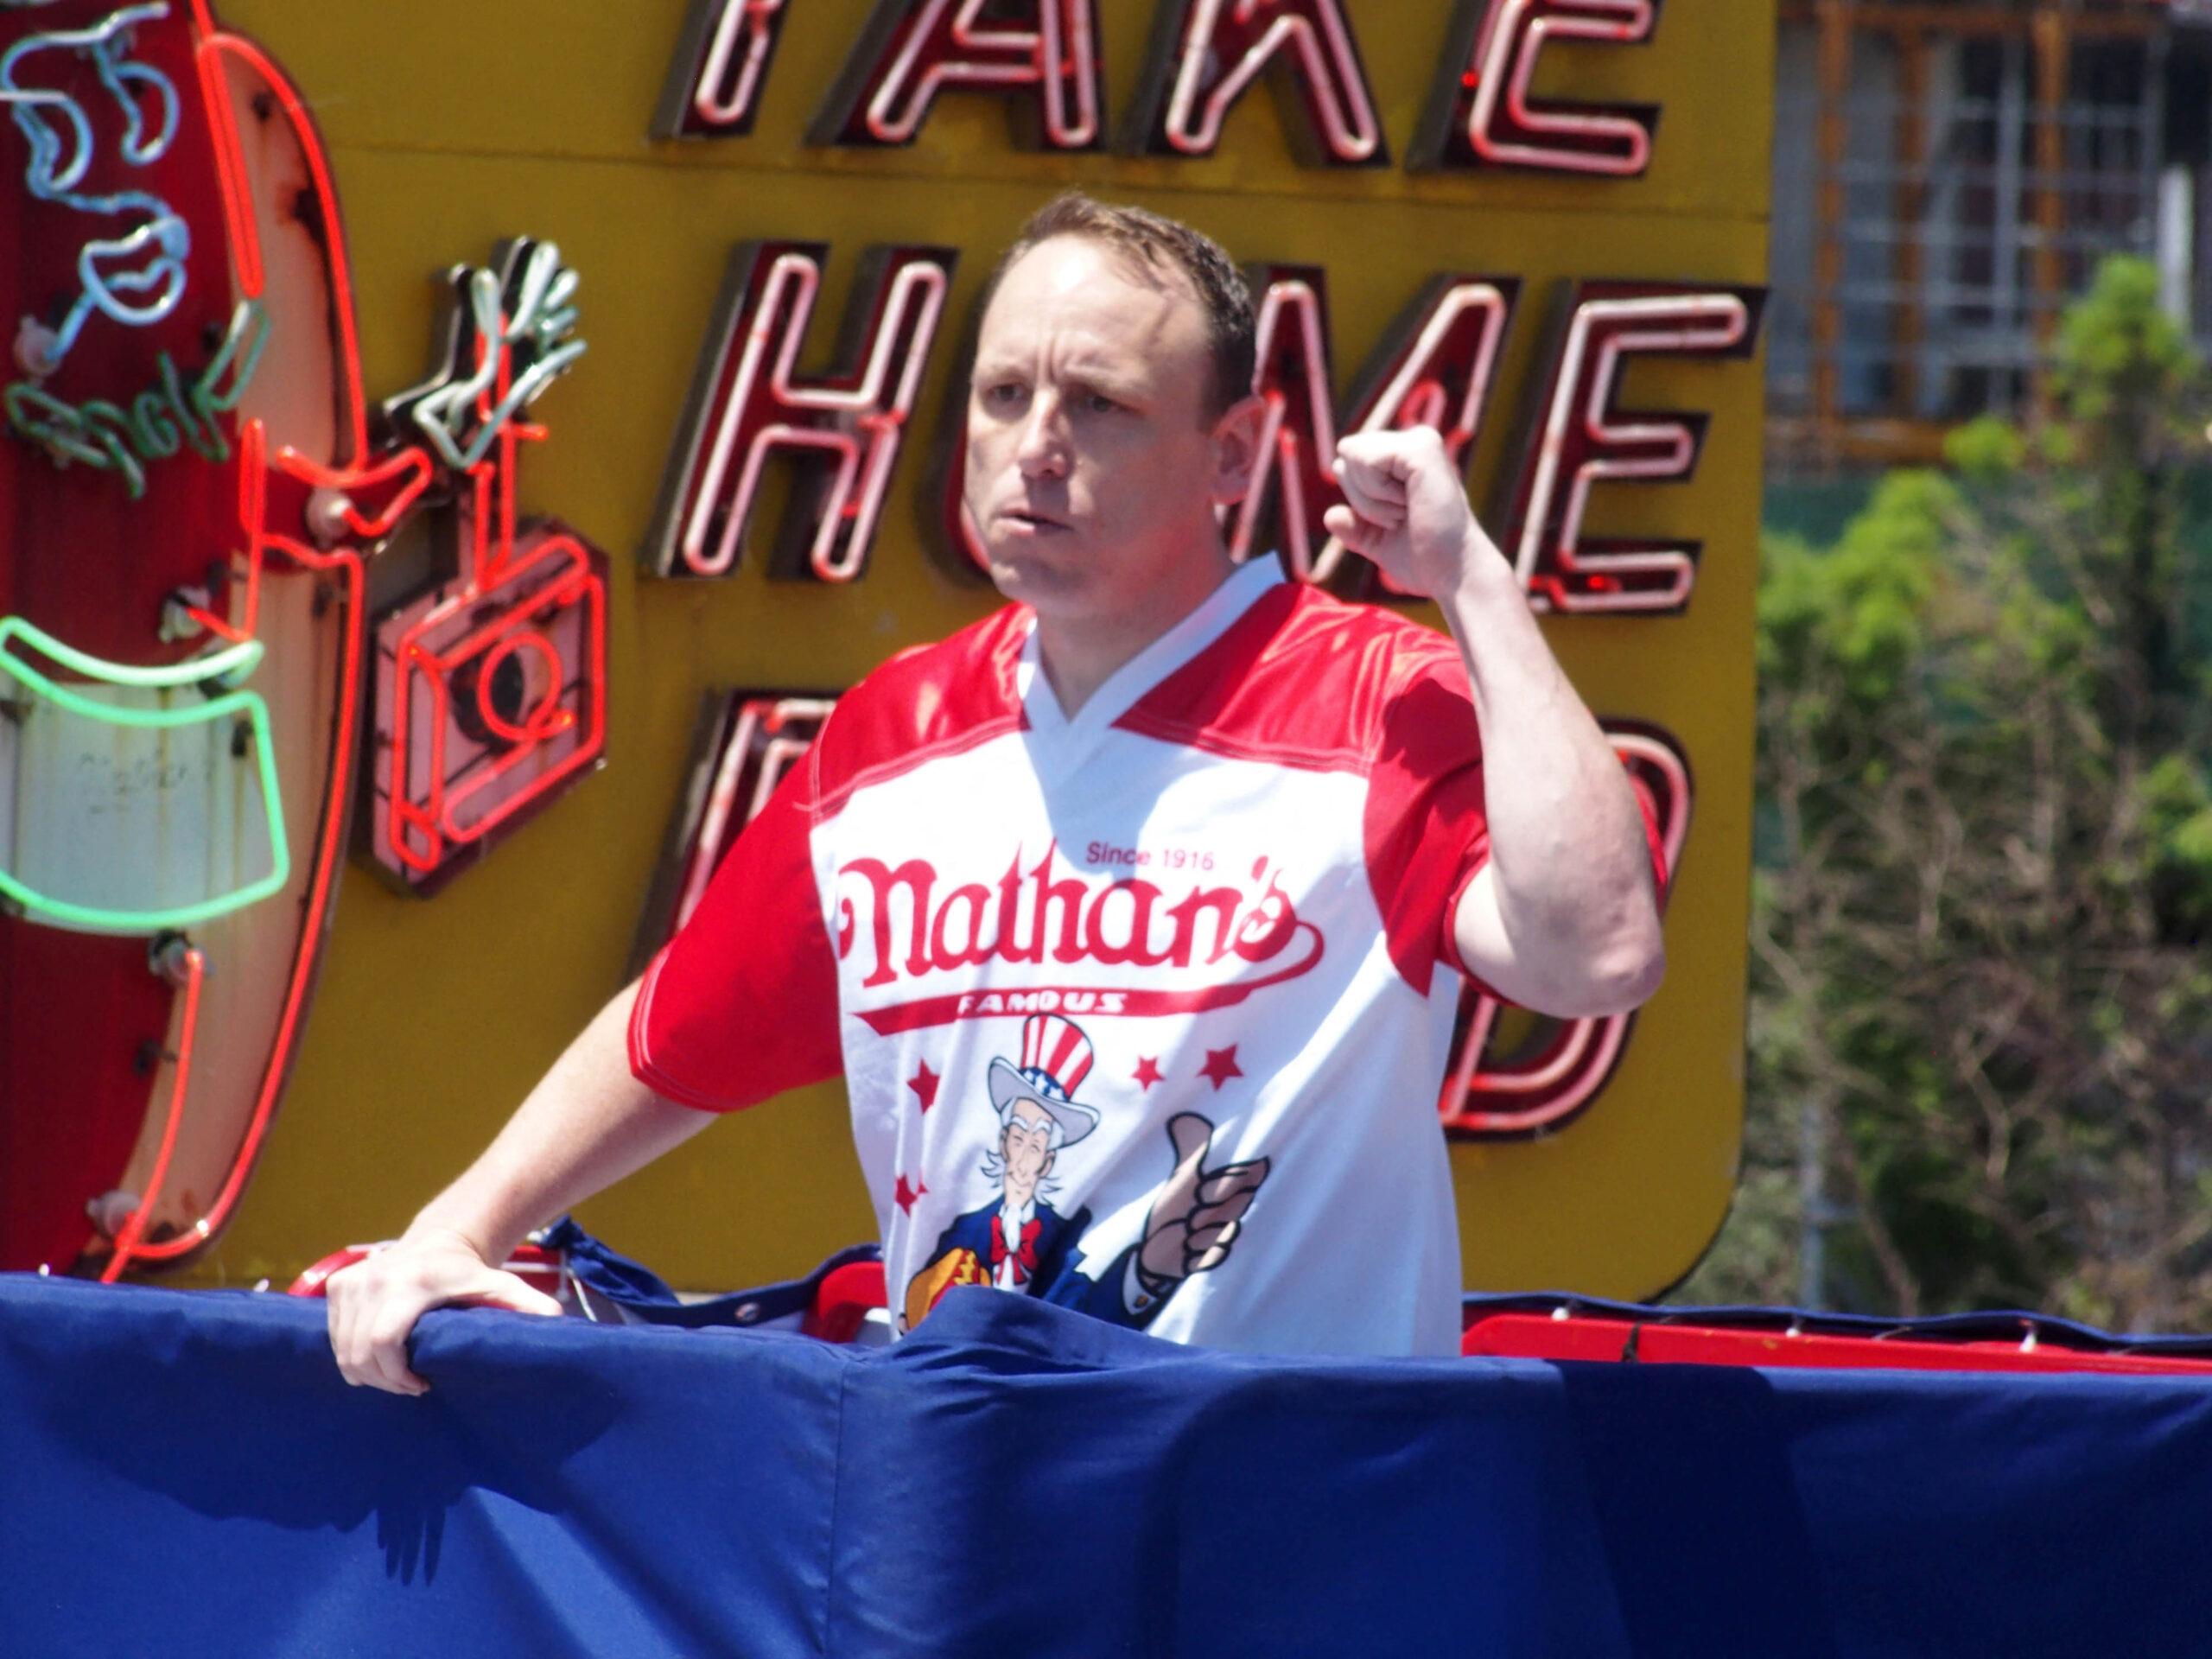 Joey Chestnut shoves hot dogs in his mouth